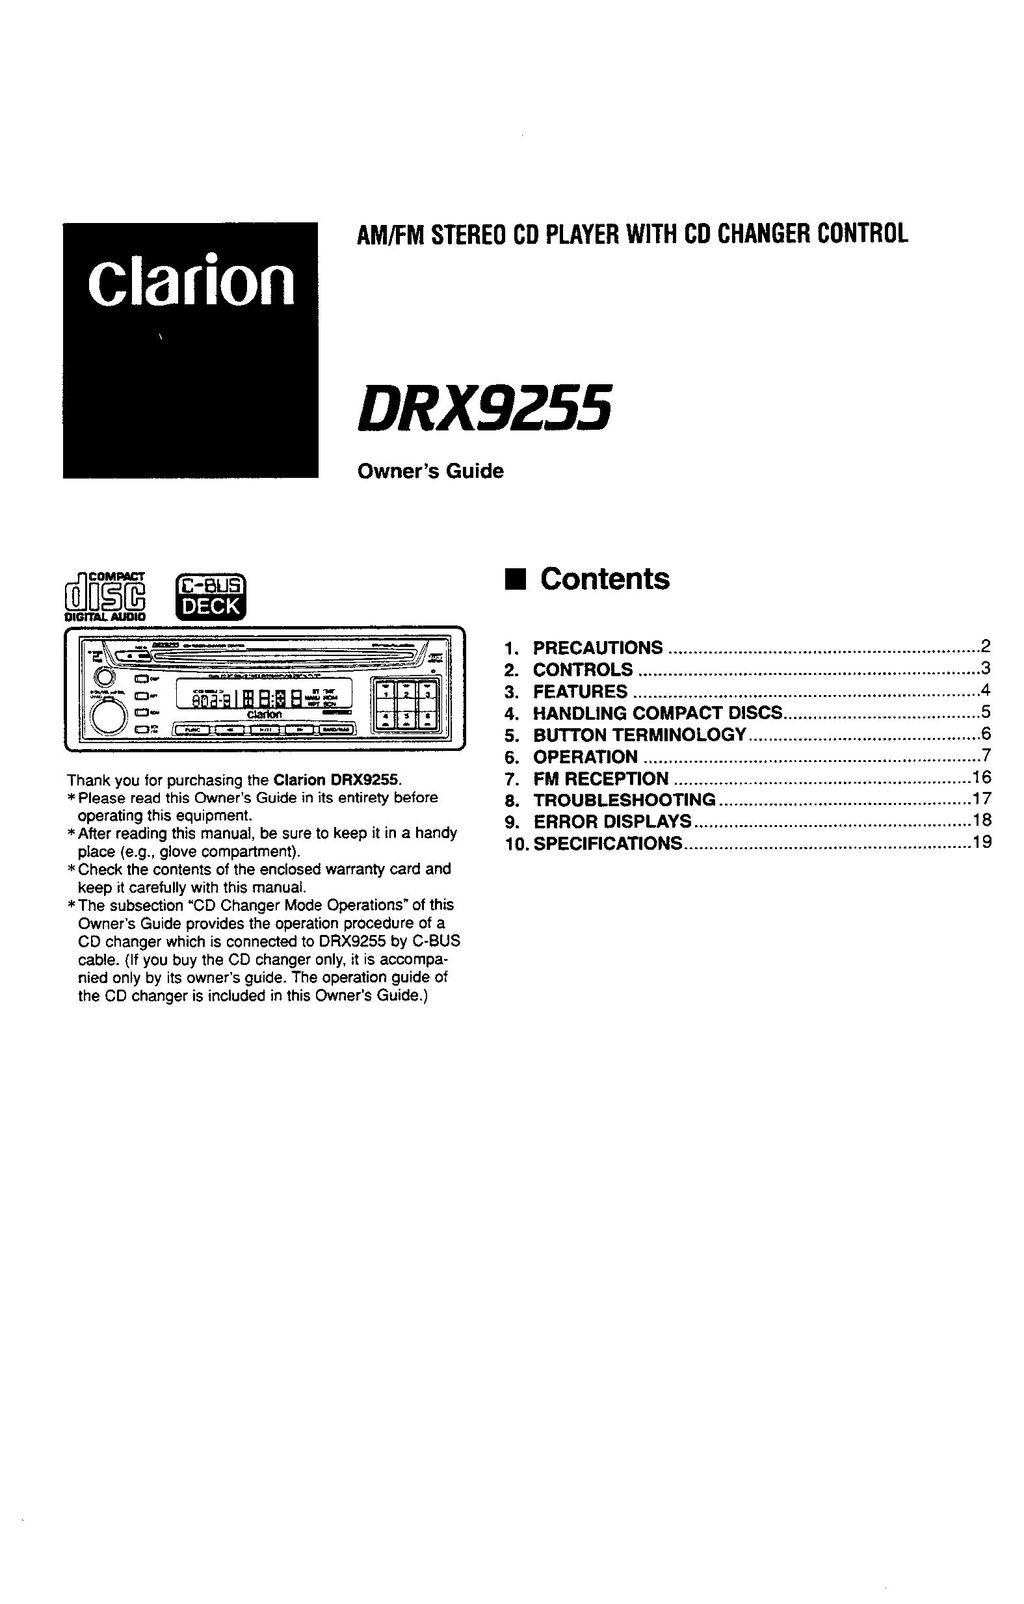 Clarion DRX9255 Stereo System User Manual